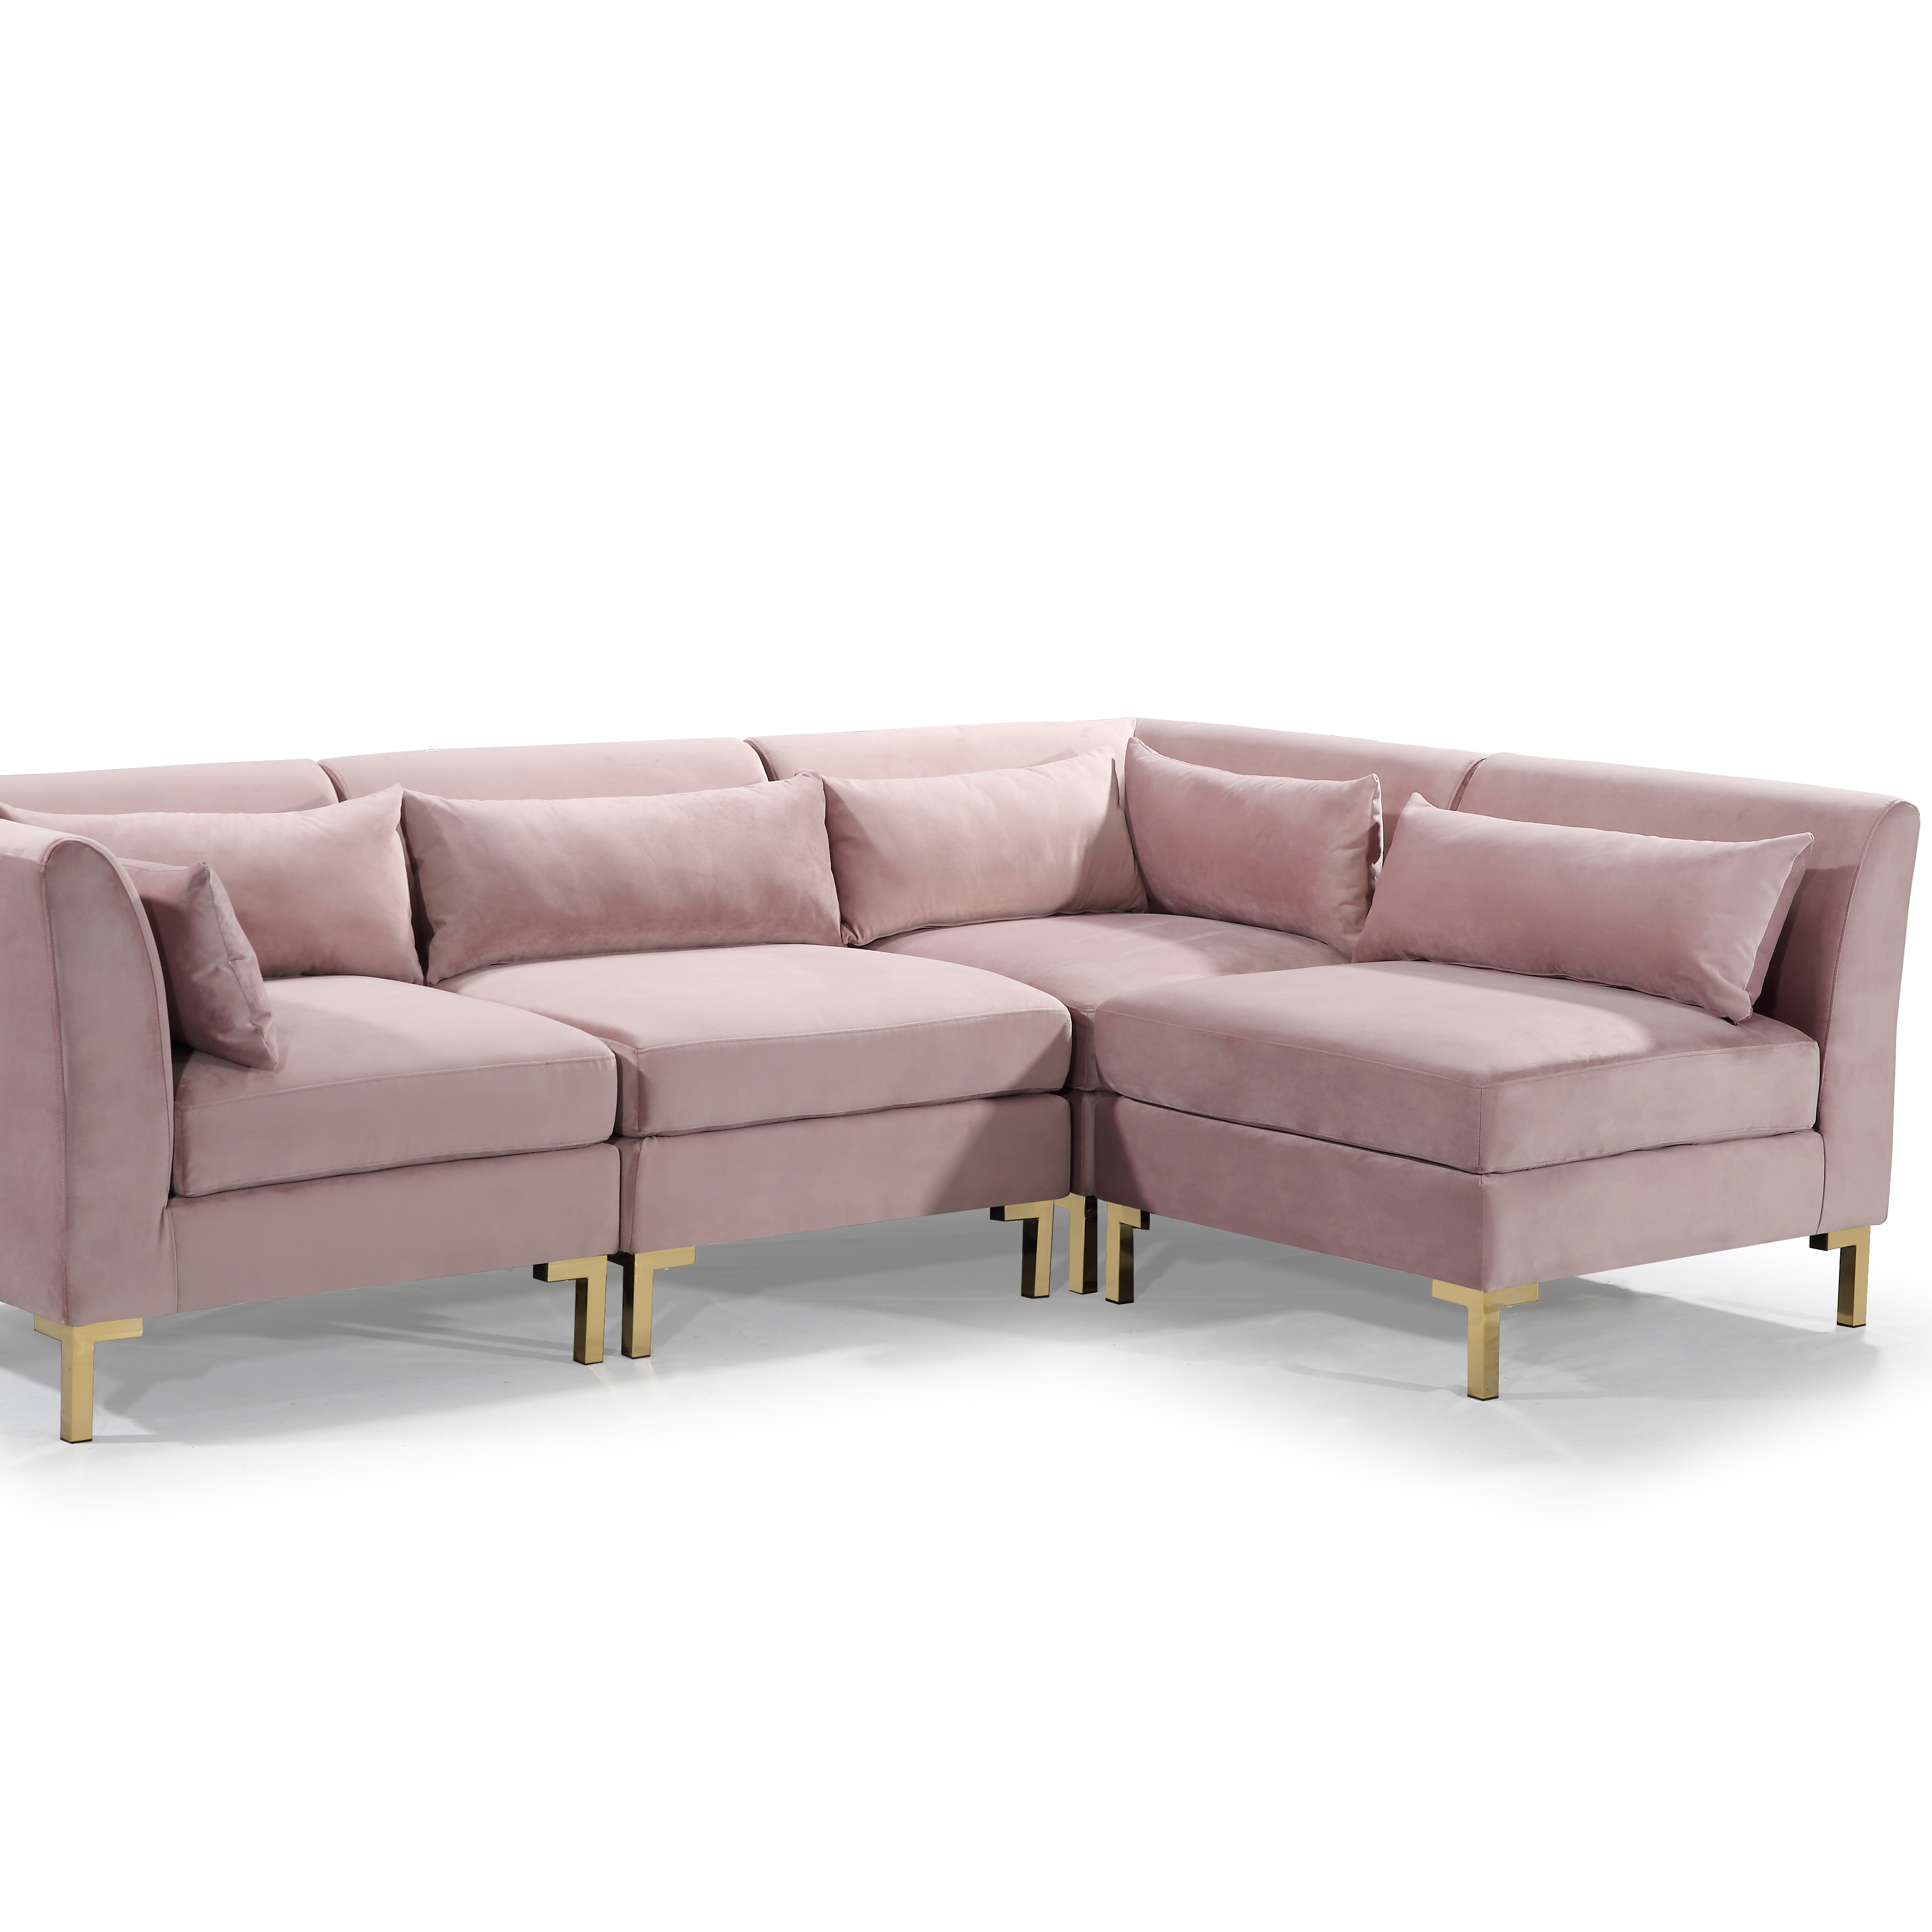 Greco Modular Chaise Sectional Sofa Solid Gold Tone Metal Y-Leg With 6 Throw Pillows - Blush